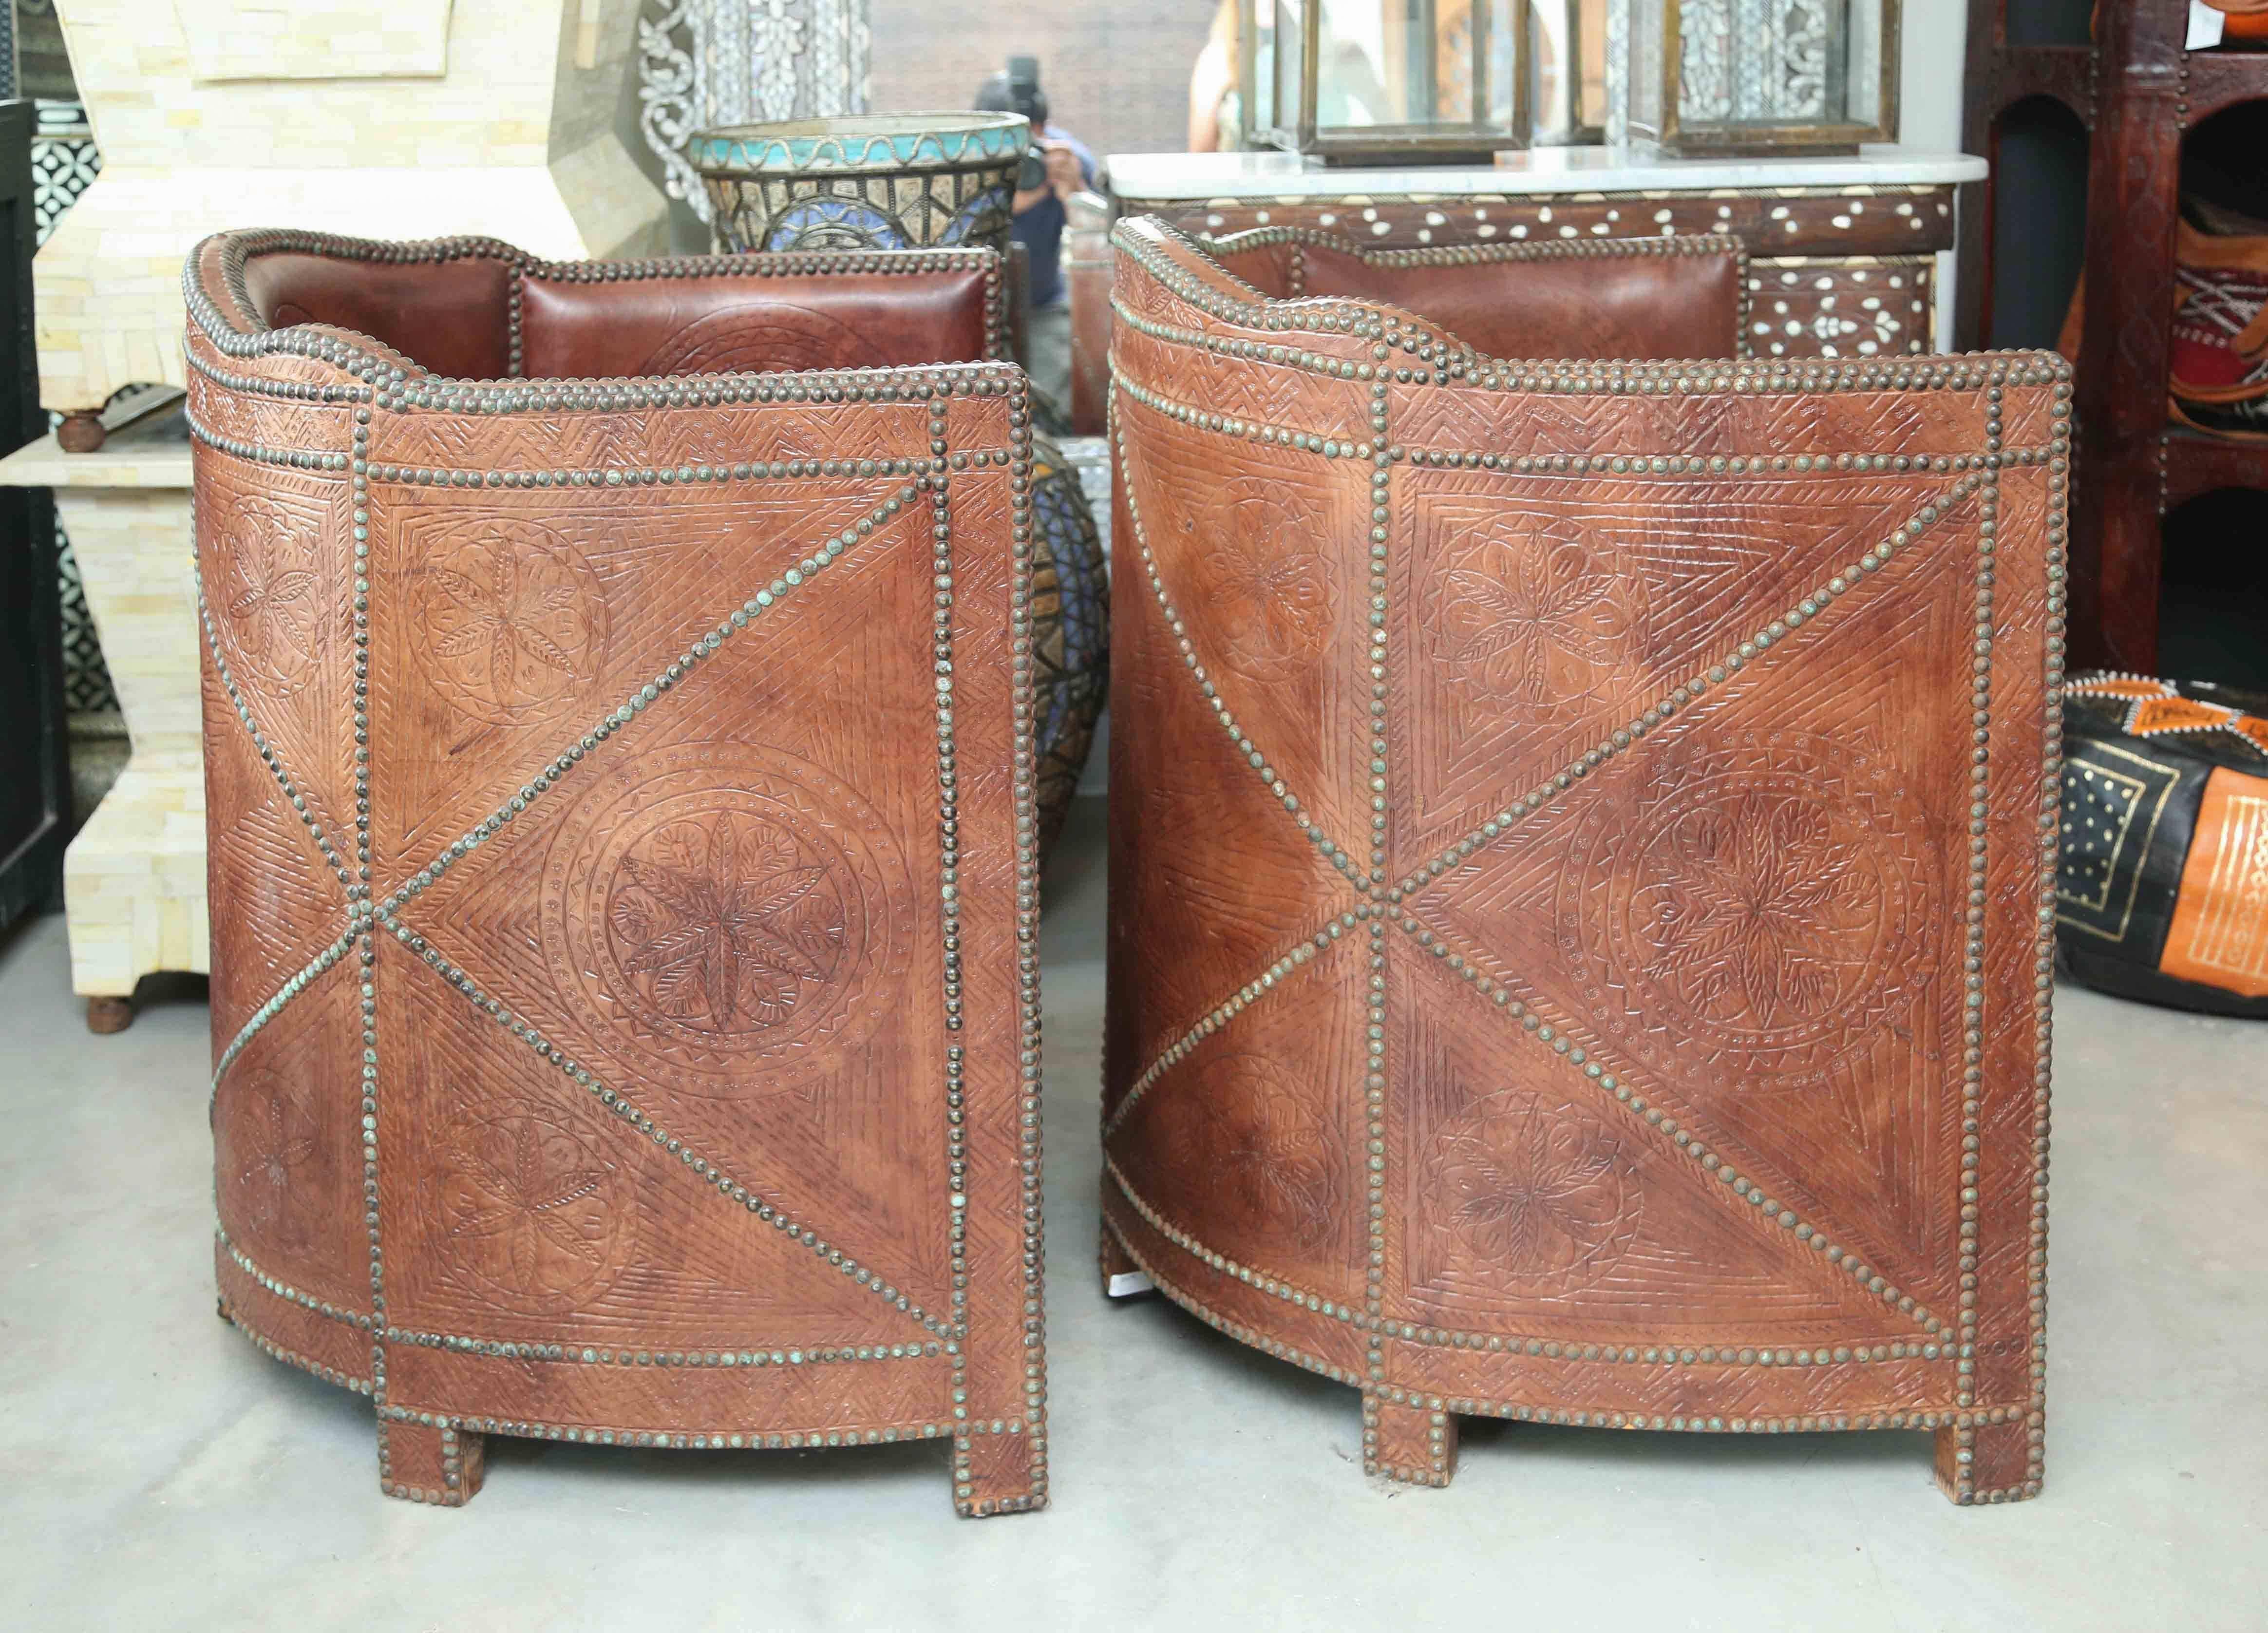 Made with hand tanned hand tooled leather in Morocco, showing the natural imperfections in the leather. These chairs are vintage, circa 1960s as evidenced by the wear and tarnishing on the brass nailheads. Beautifully handcrafted and decorated,